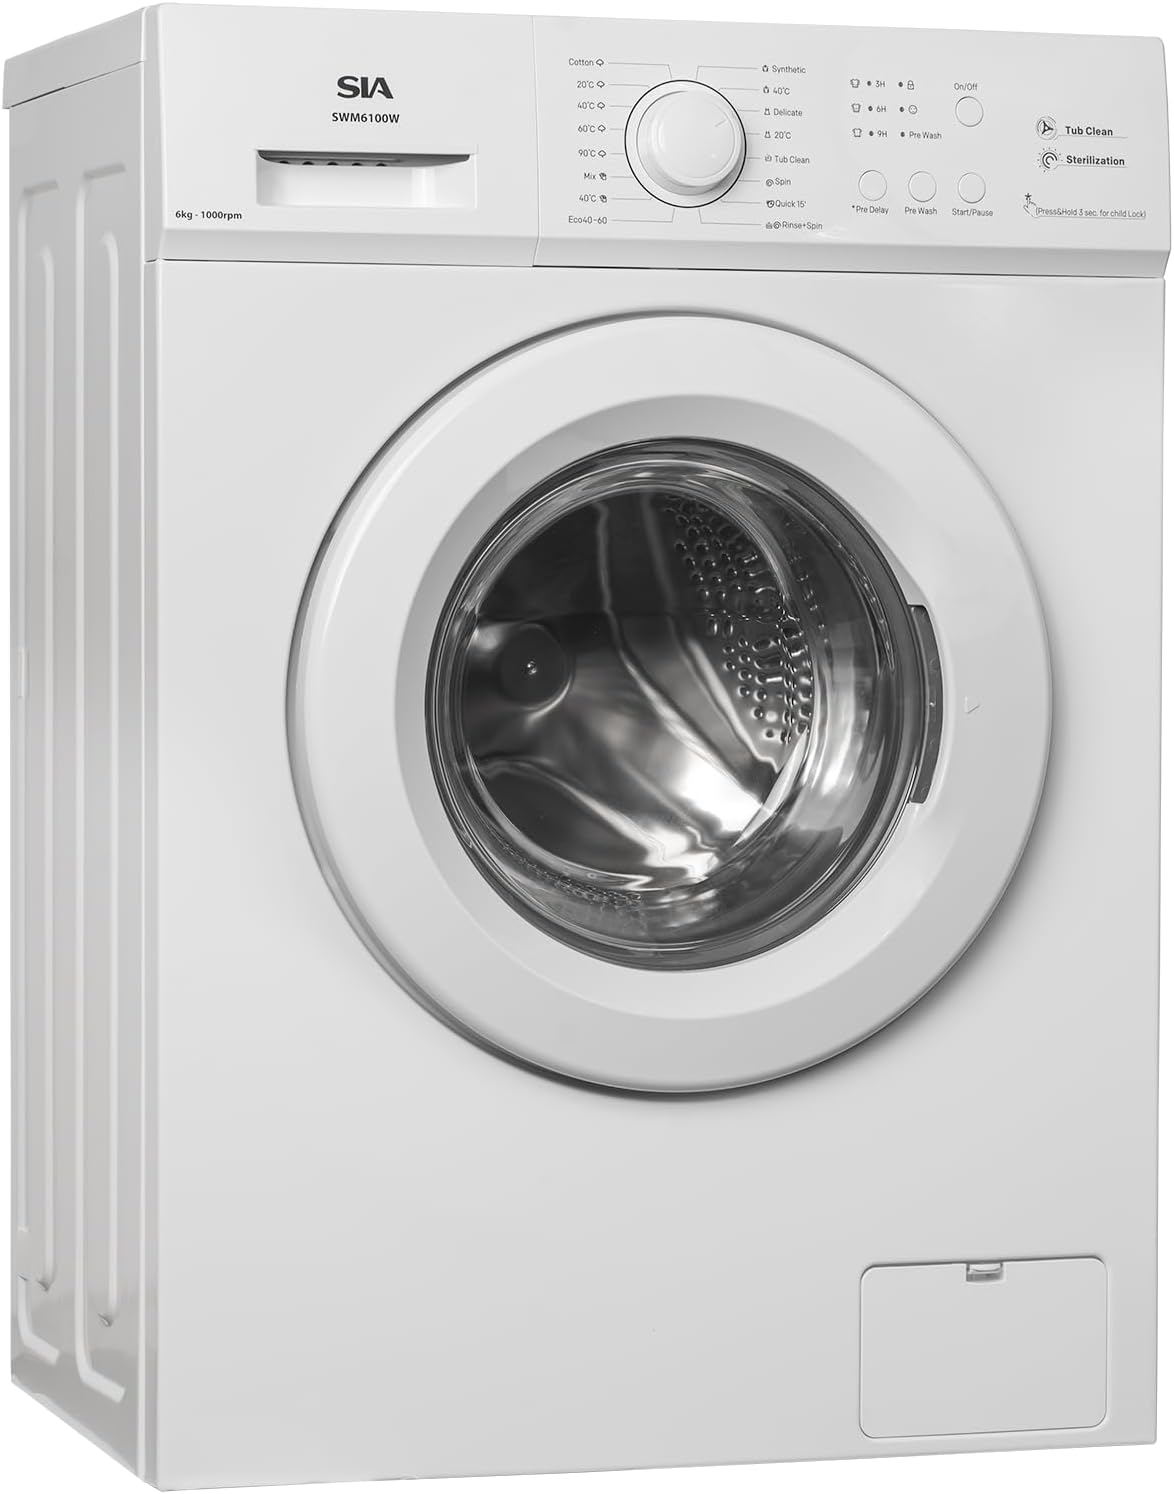 SIA 6kg 1000RPM Washing Machine with 9 Preset Programs Energy Rating E in White - SWM6100W - Amazing Gadgets Outlet